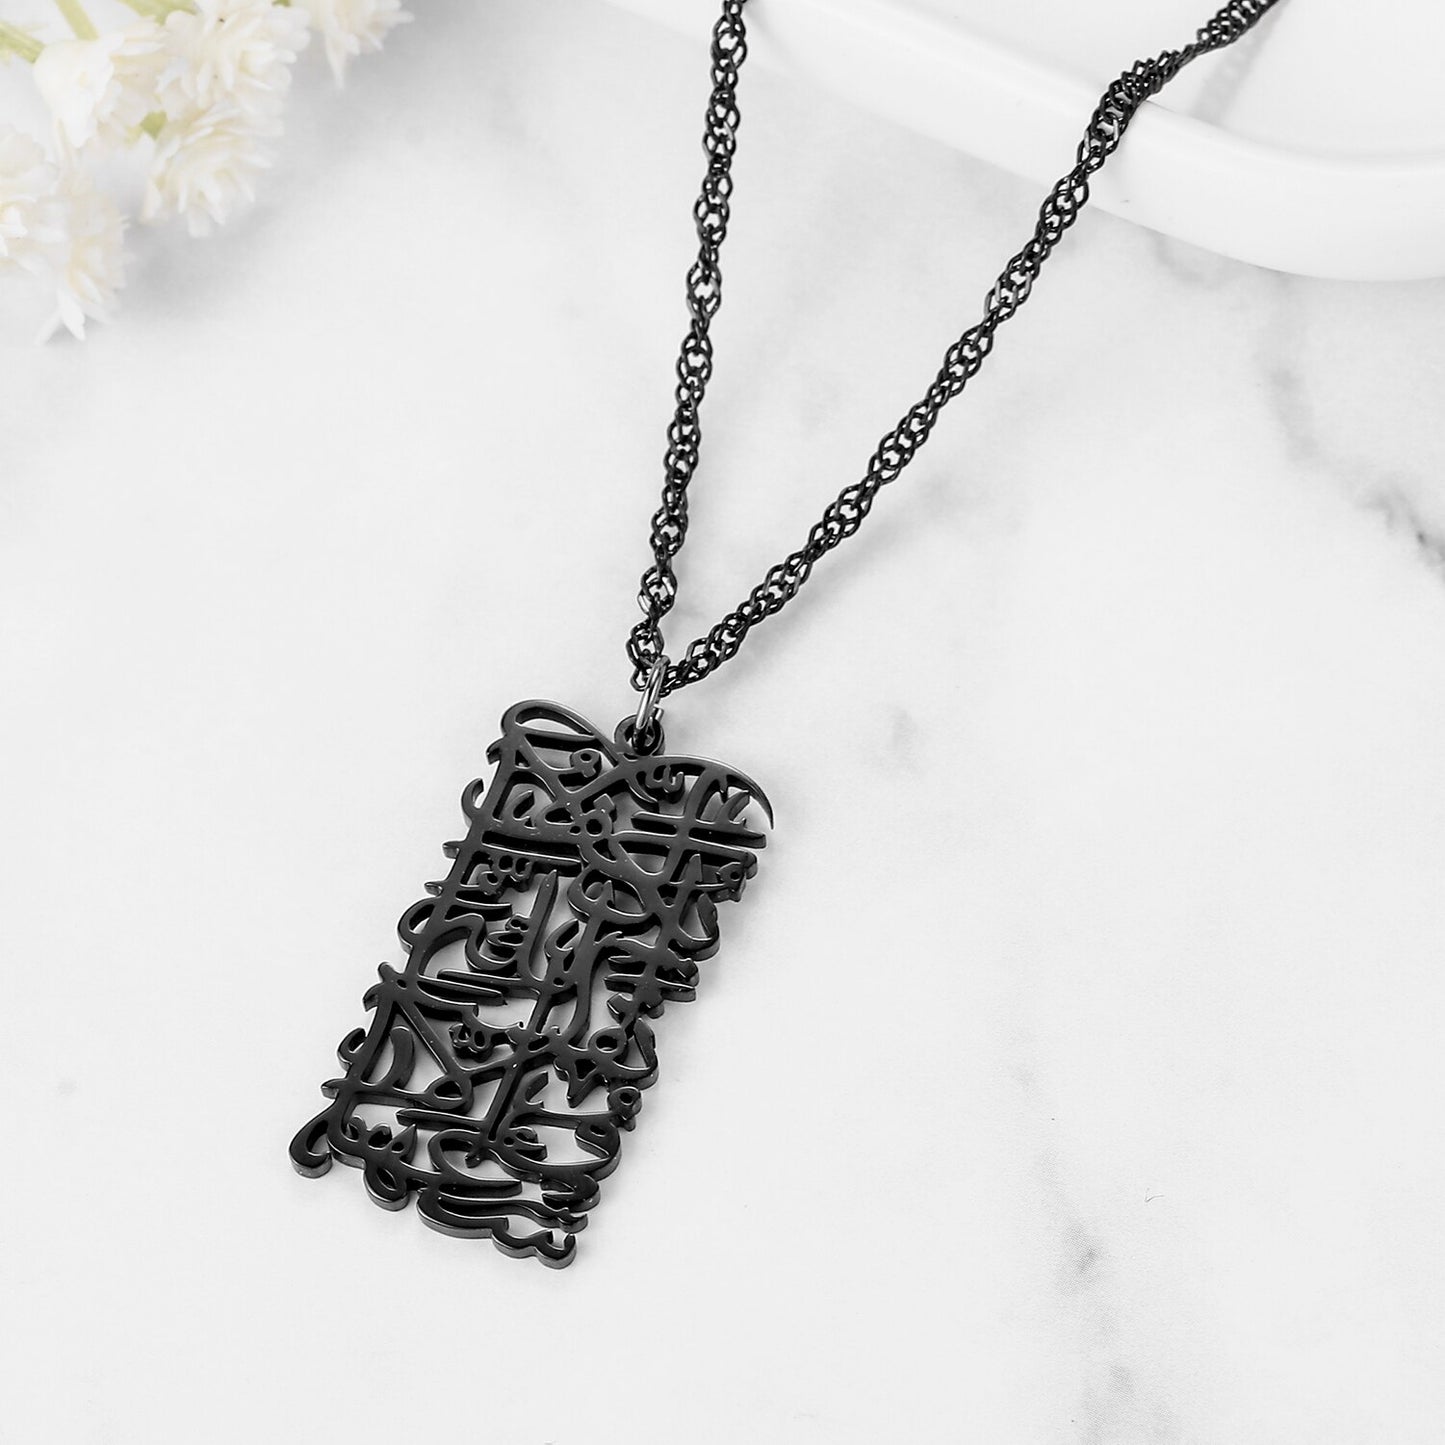 "Allah Does Not Burden A Soul Beyond What It Can Bear" - Calligraphy Necklace